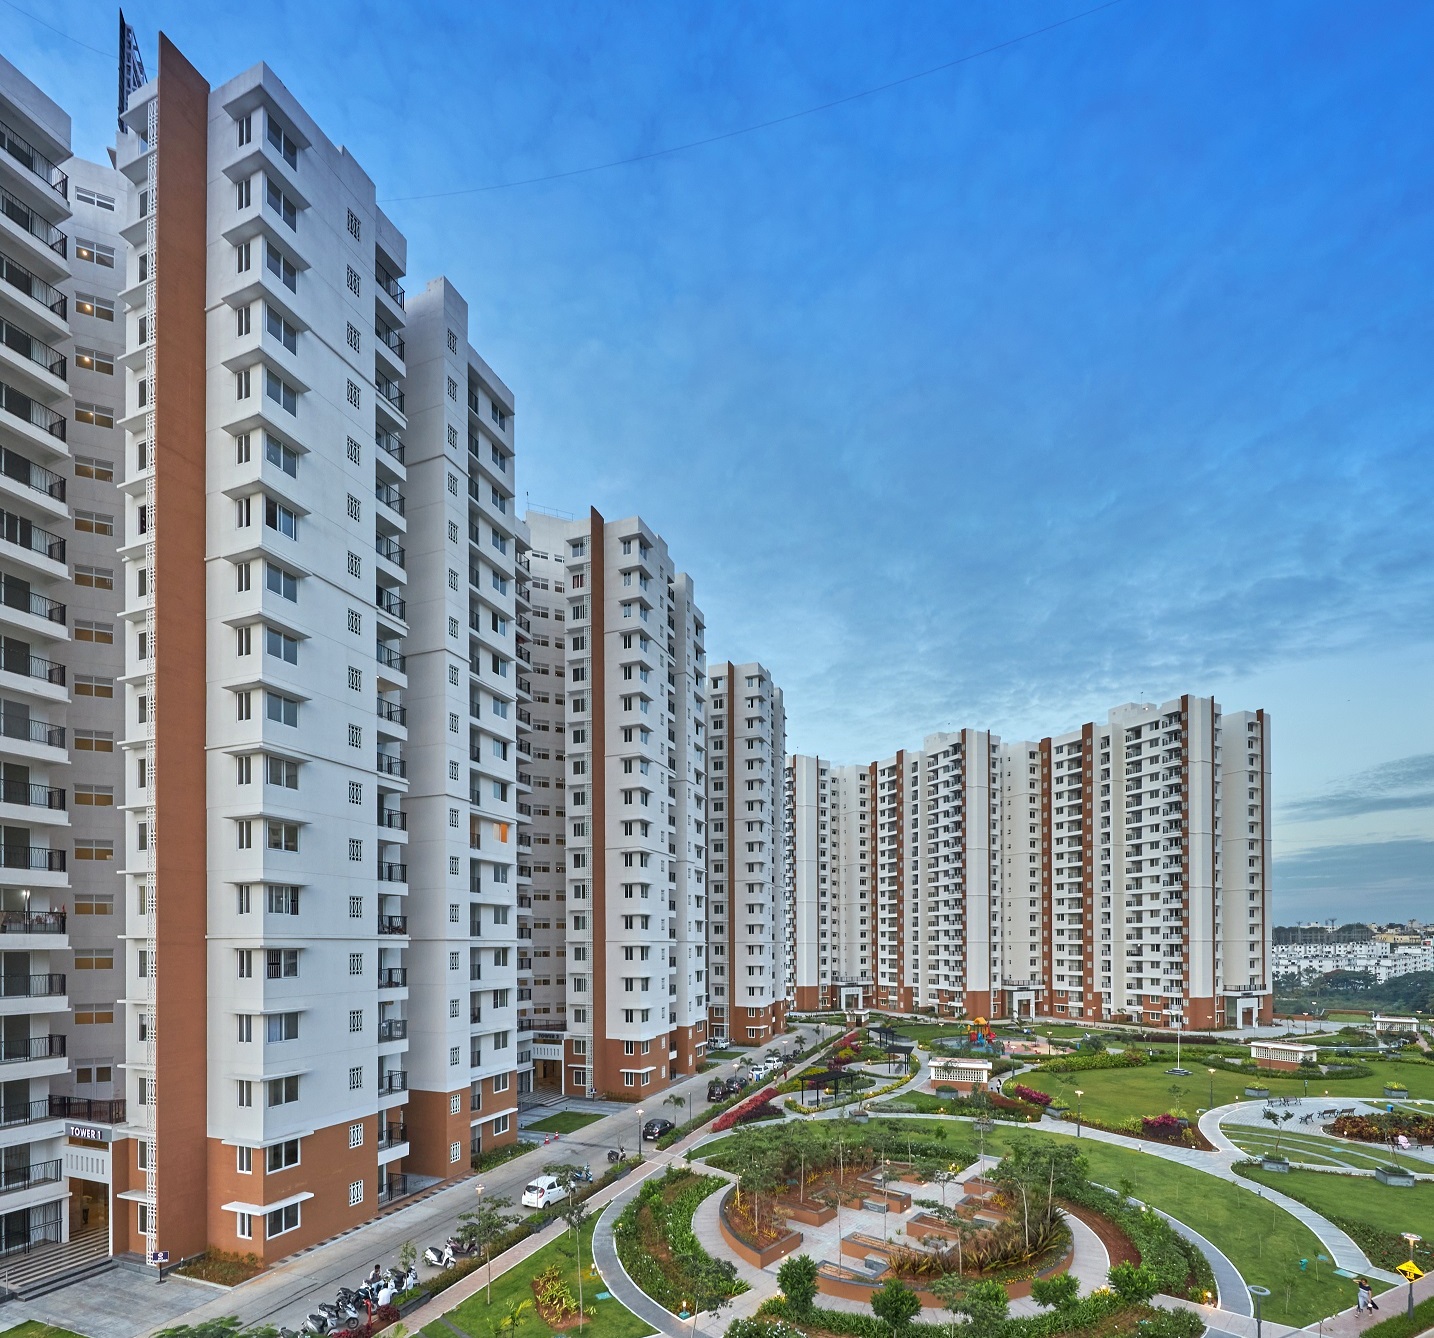 Prestige Group’s Multiple Project Completions in Bengaluru